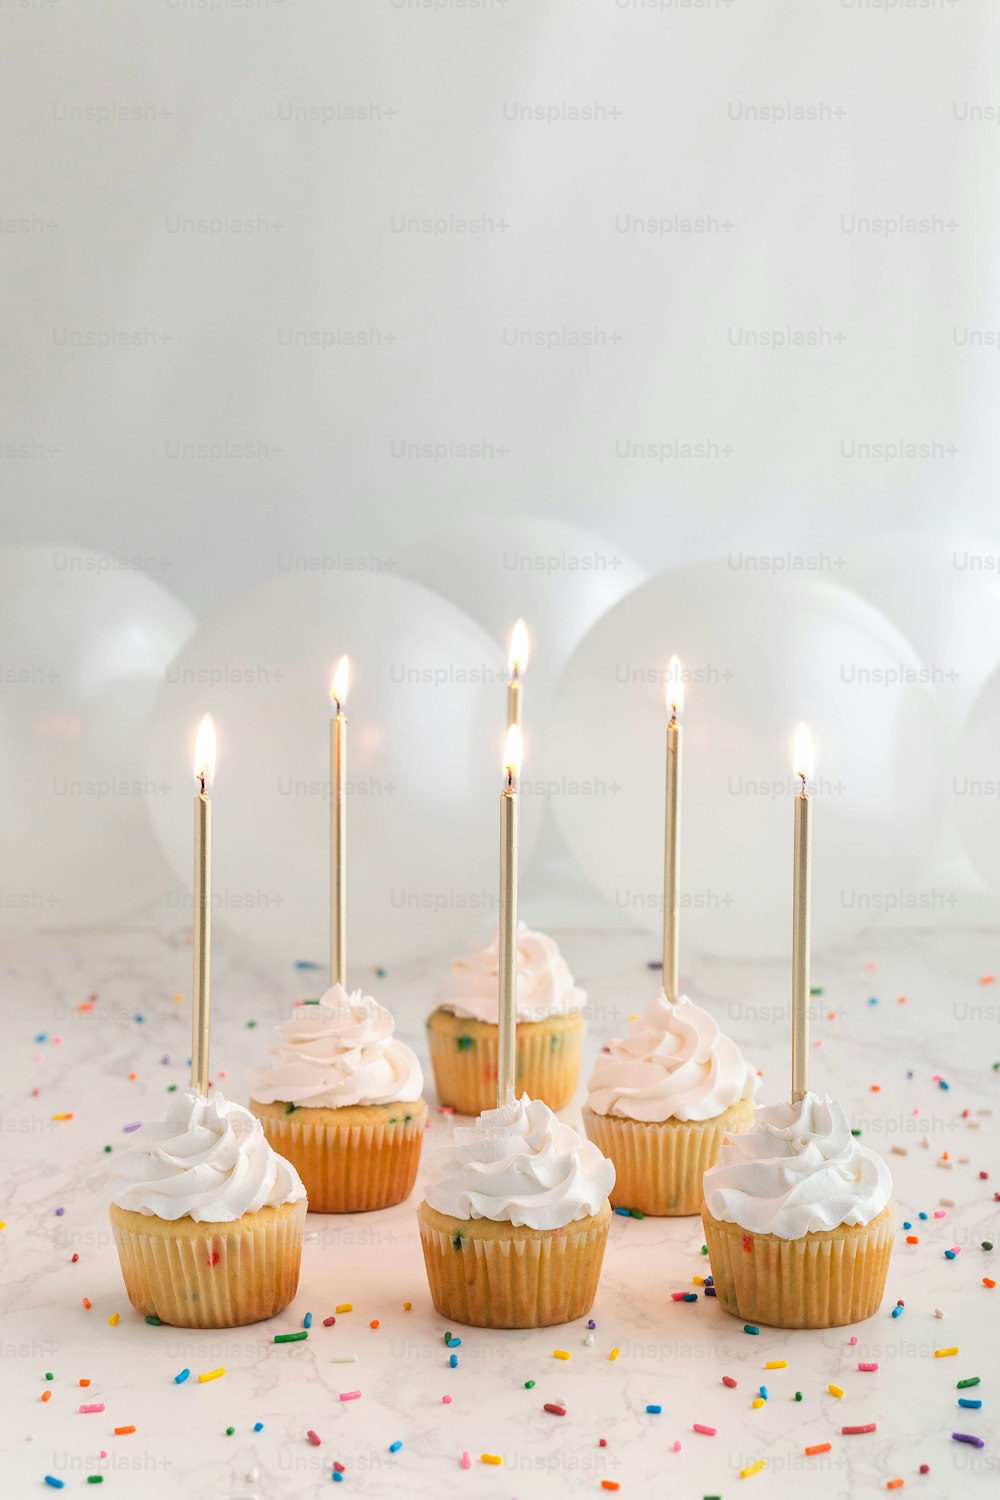 a group of cupcakes with white frosting and lit candles